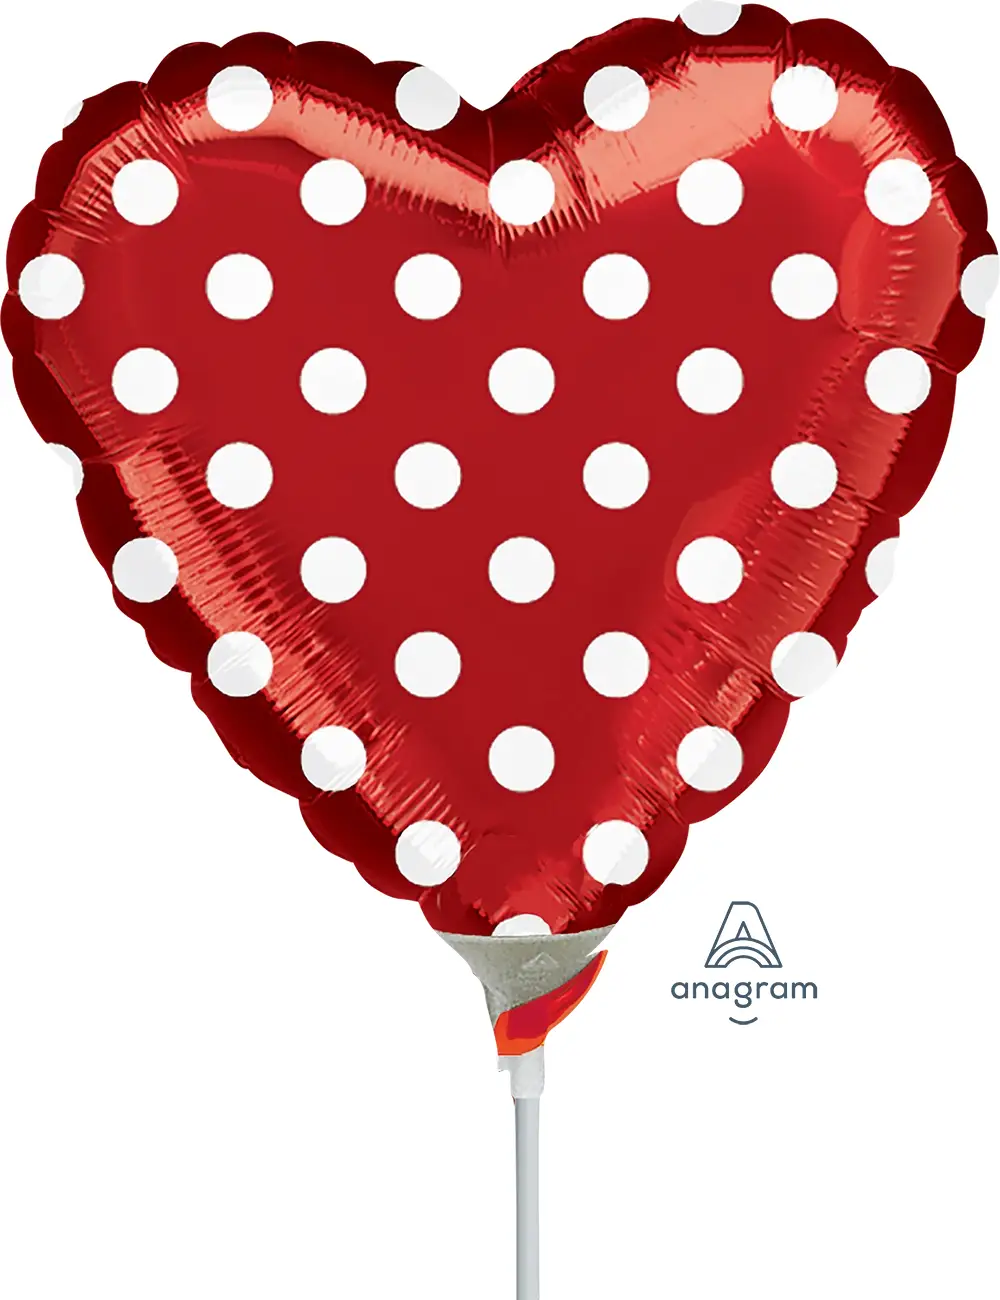 Red heart shape with polka dots